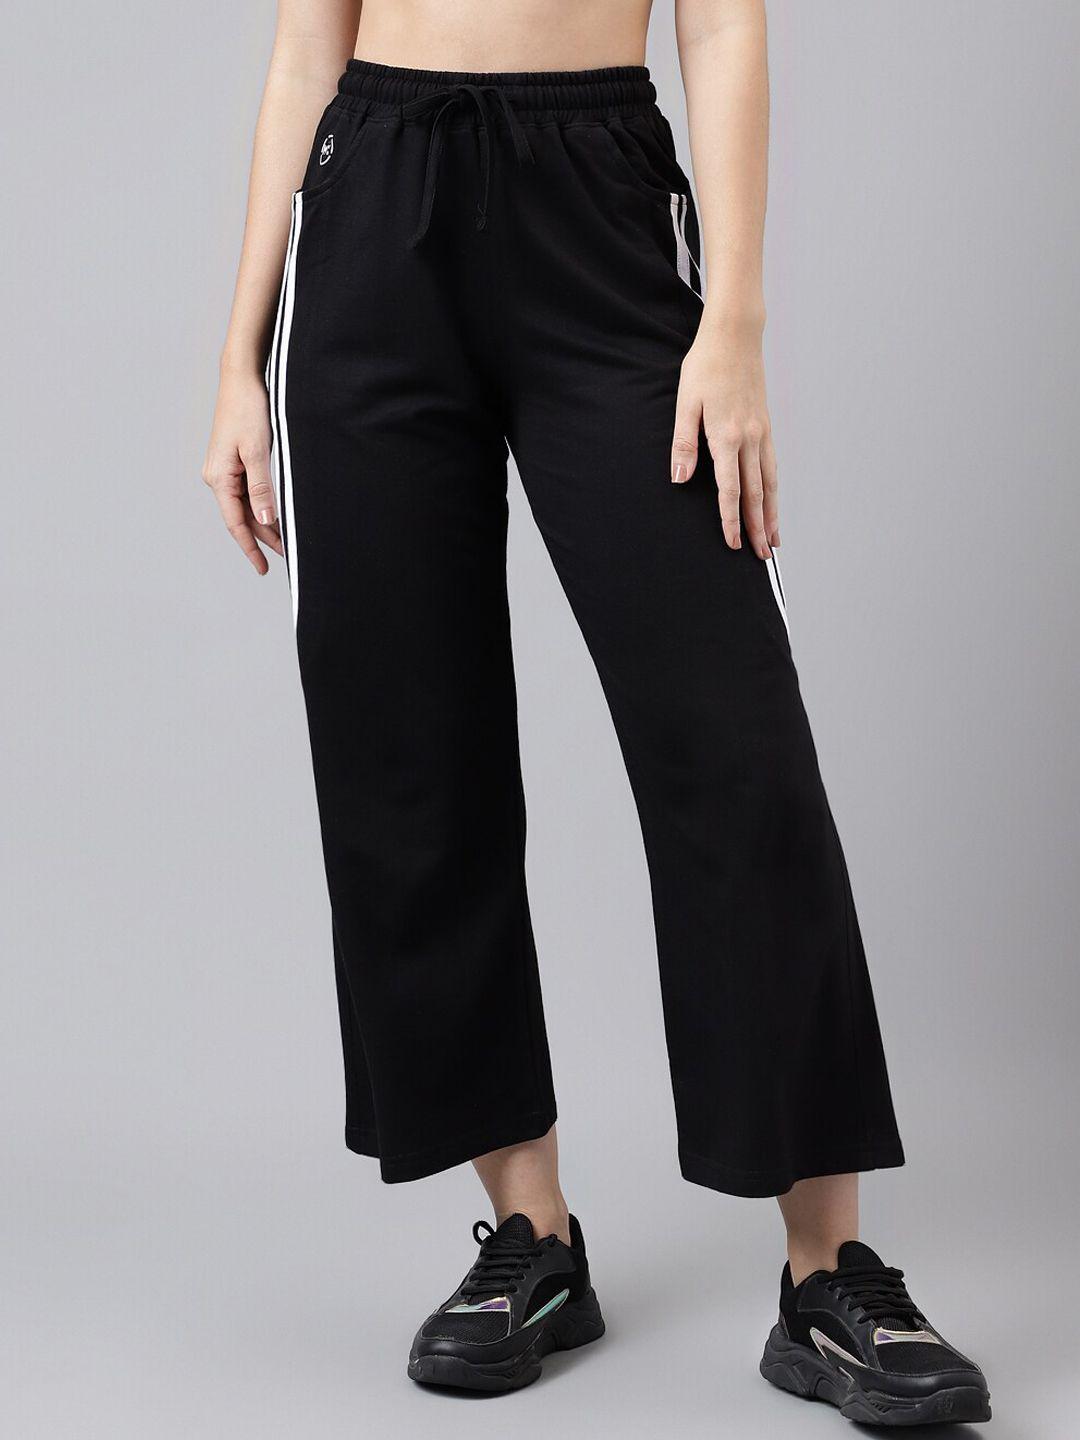 mkh women mid-rise relaxed-fit dry fit track pants